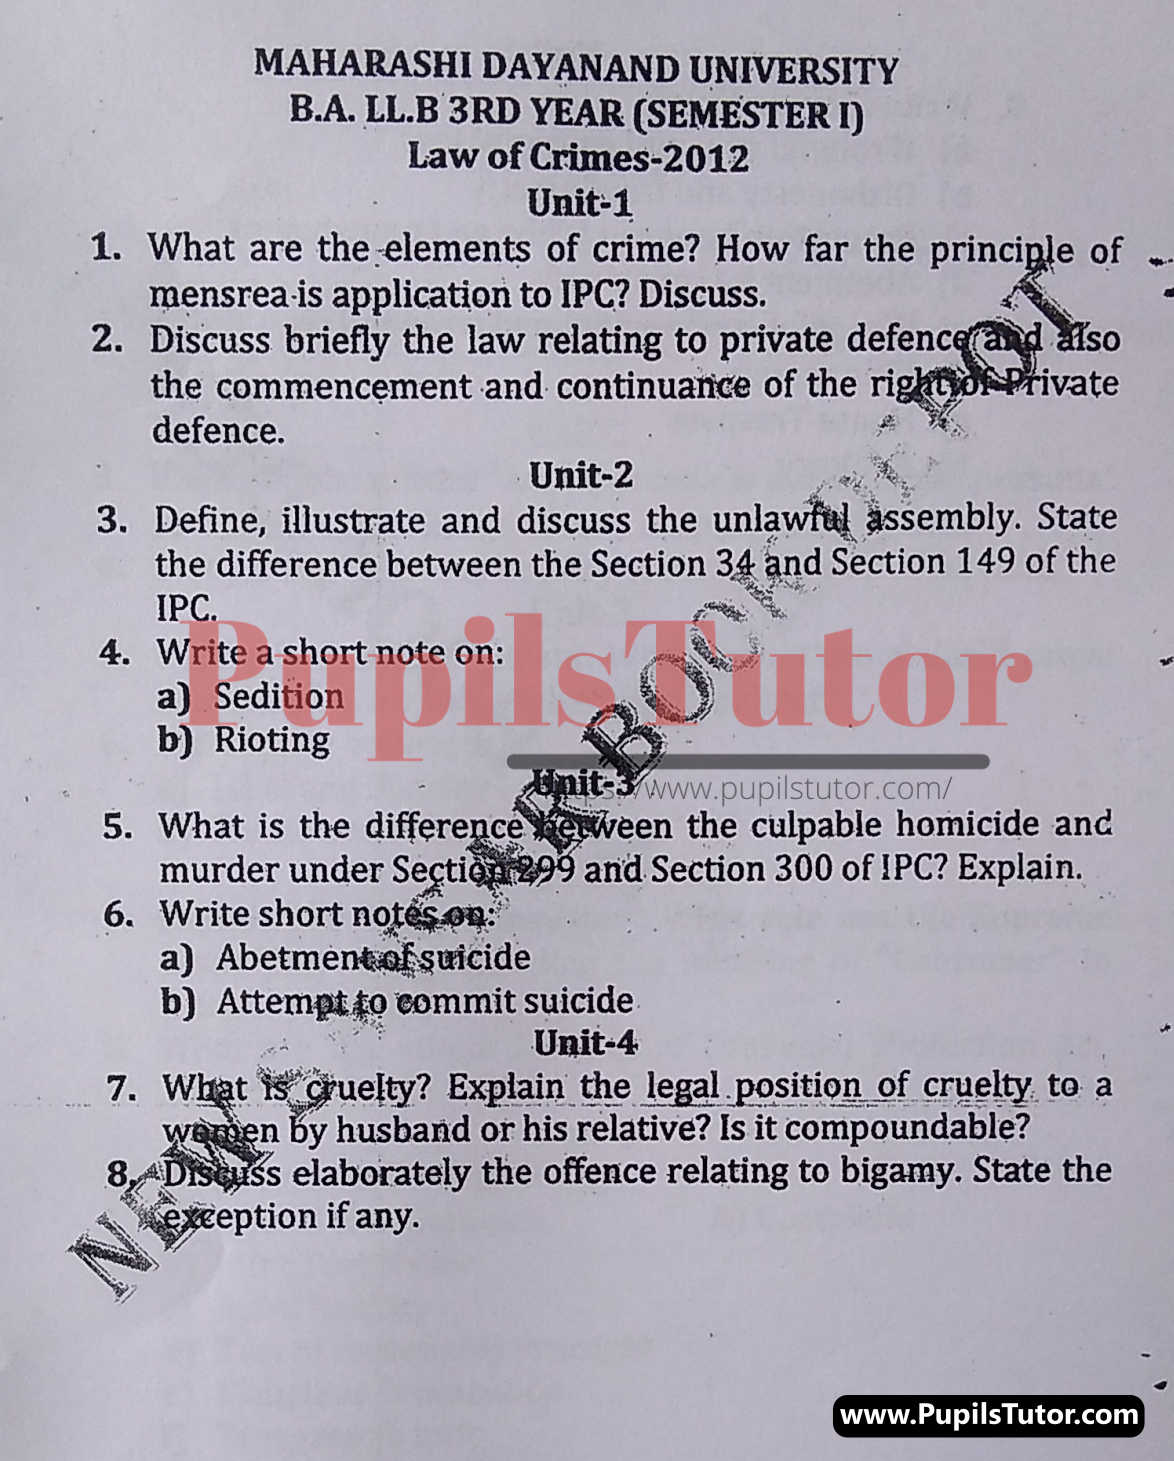 MDU (Maharshi Dayanand University, Rohtak Haryana) LLB Regular Exam (Hons.) First Semester Previous Year Law Of Crimes Question Paper For 2012 Exam (Question Paper Page 1) - pupilstutor.com